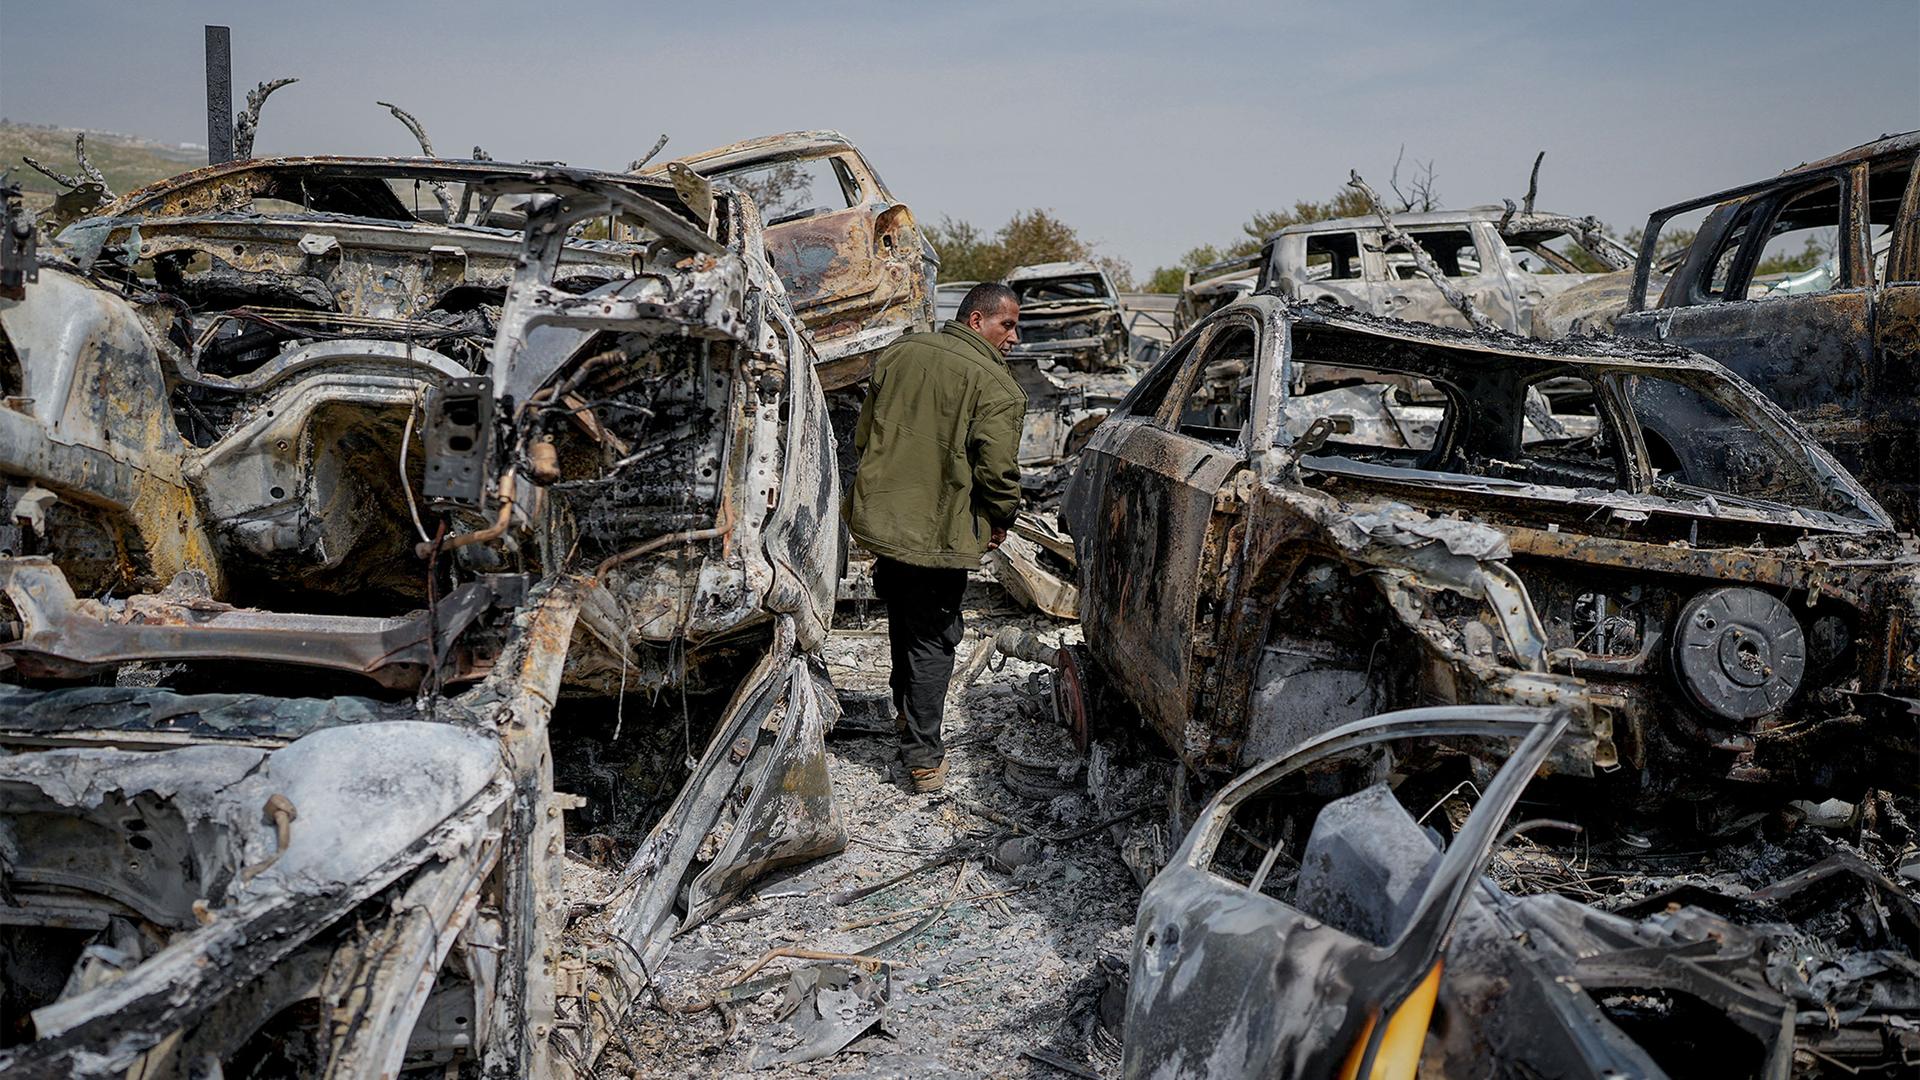 A Palestinian man walks between scorched cars in a scrapyard, in the town of Hawara, near the West Bank city of Nablus, Feb. 27, 2023.